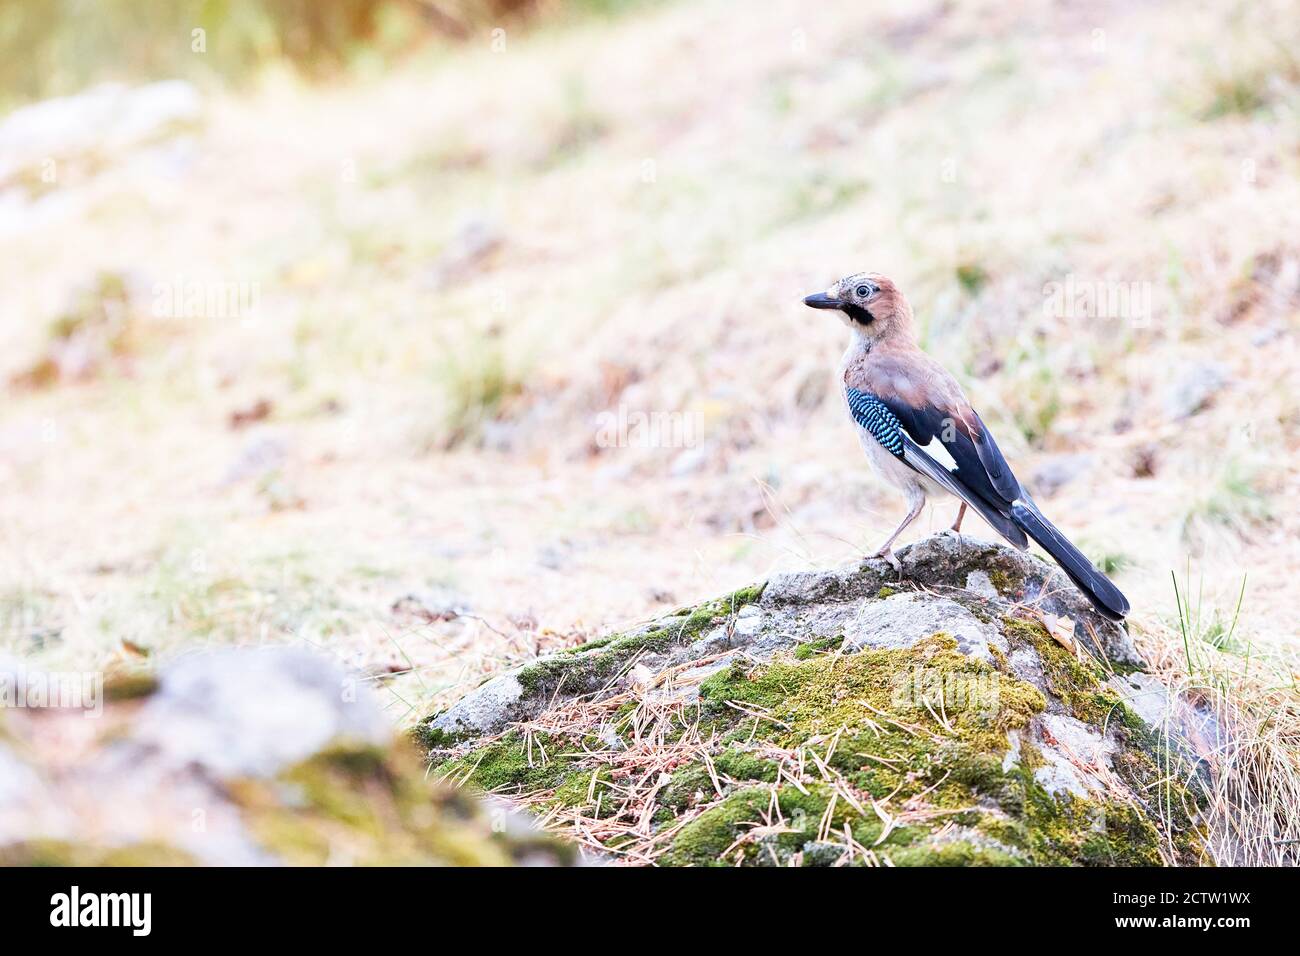 Portrait of a beautiful bird perched on a stone. Jay or Garrulus Glandarius. Concept of nature Stock Photo